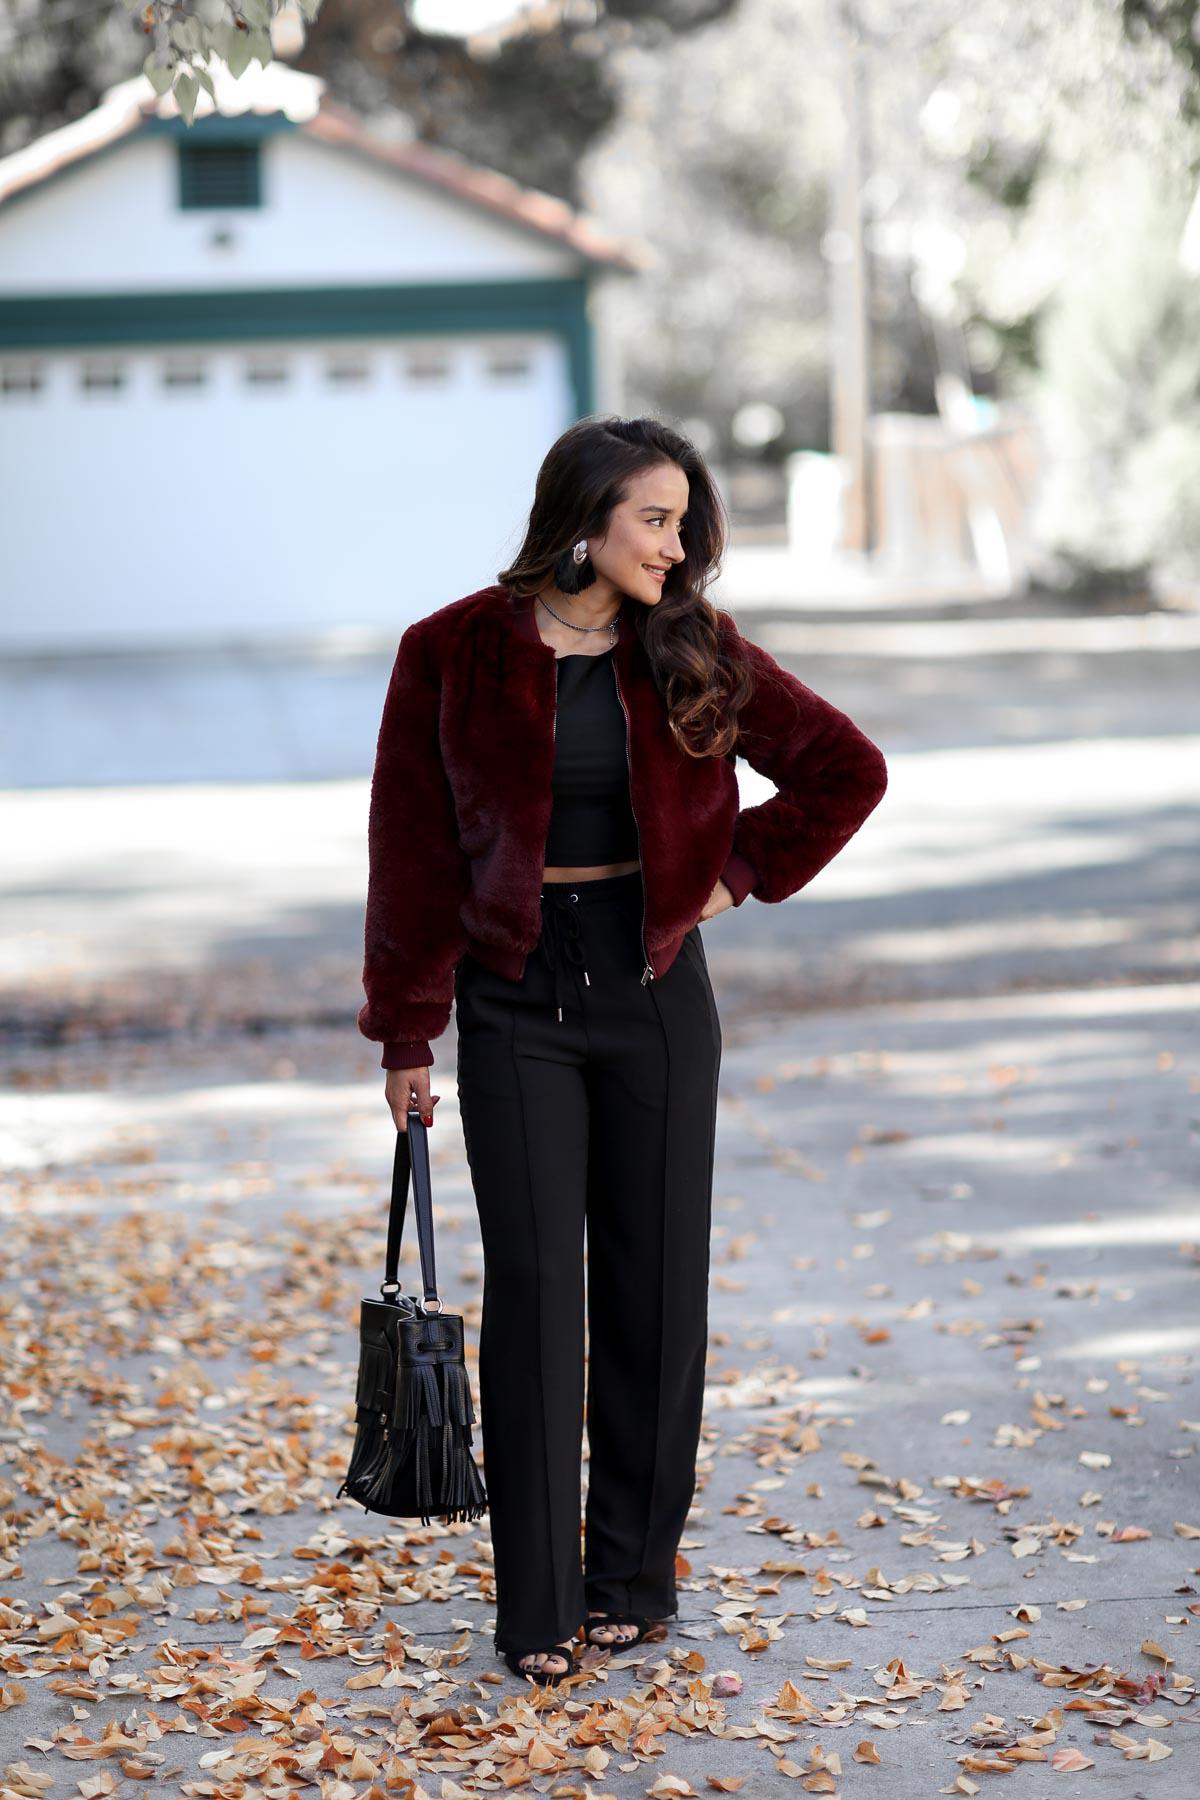 stiletto-confessions-hm-track-pants-forever21-bomber-2